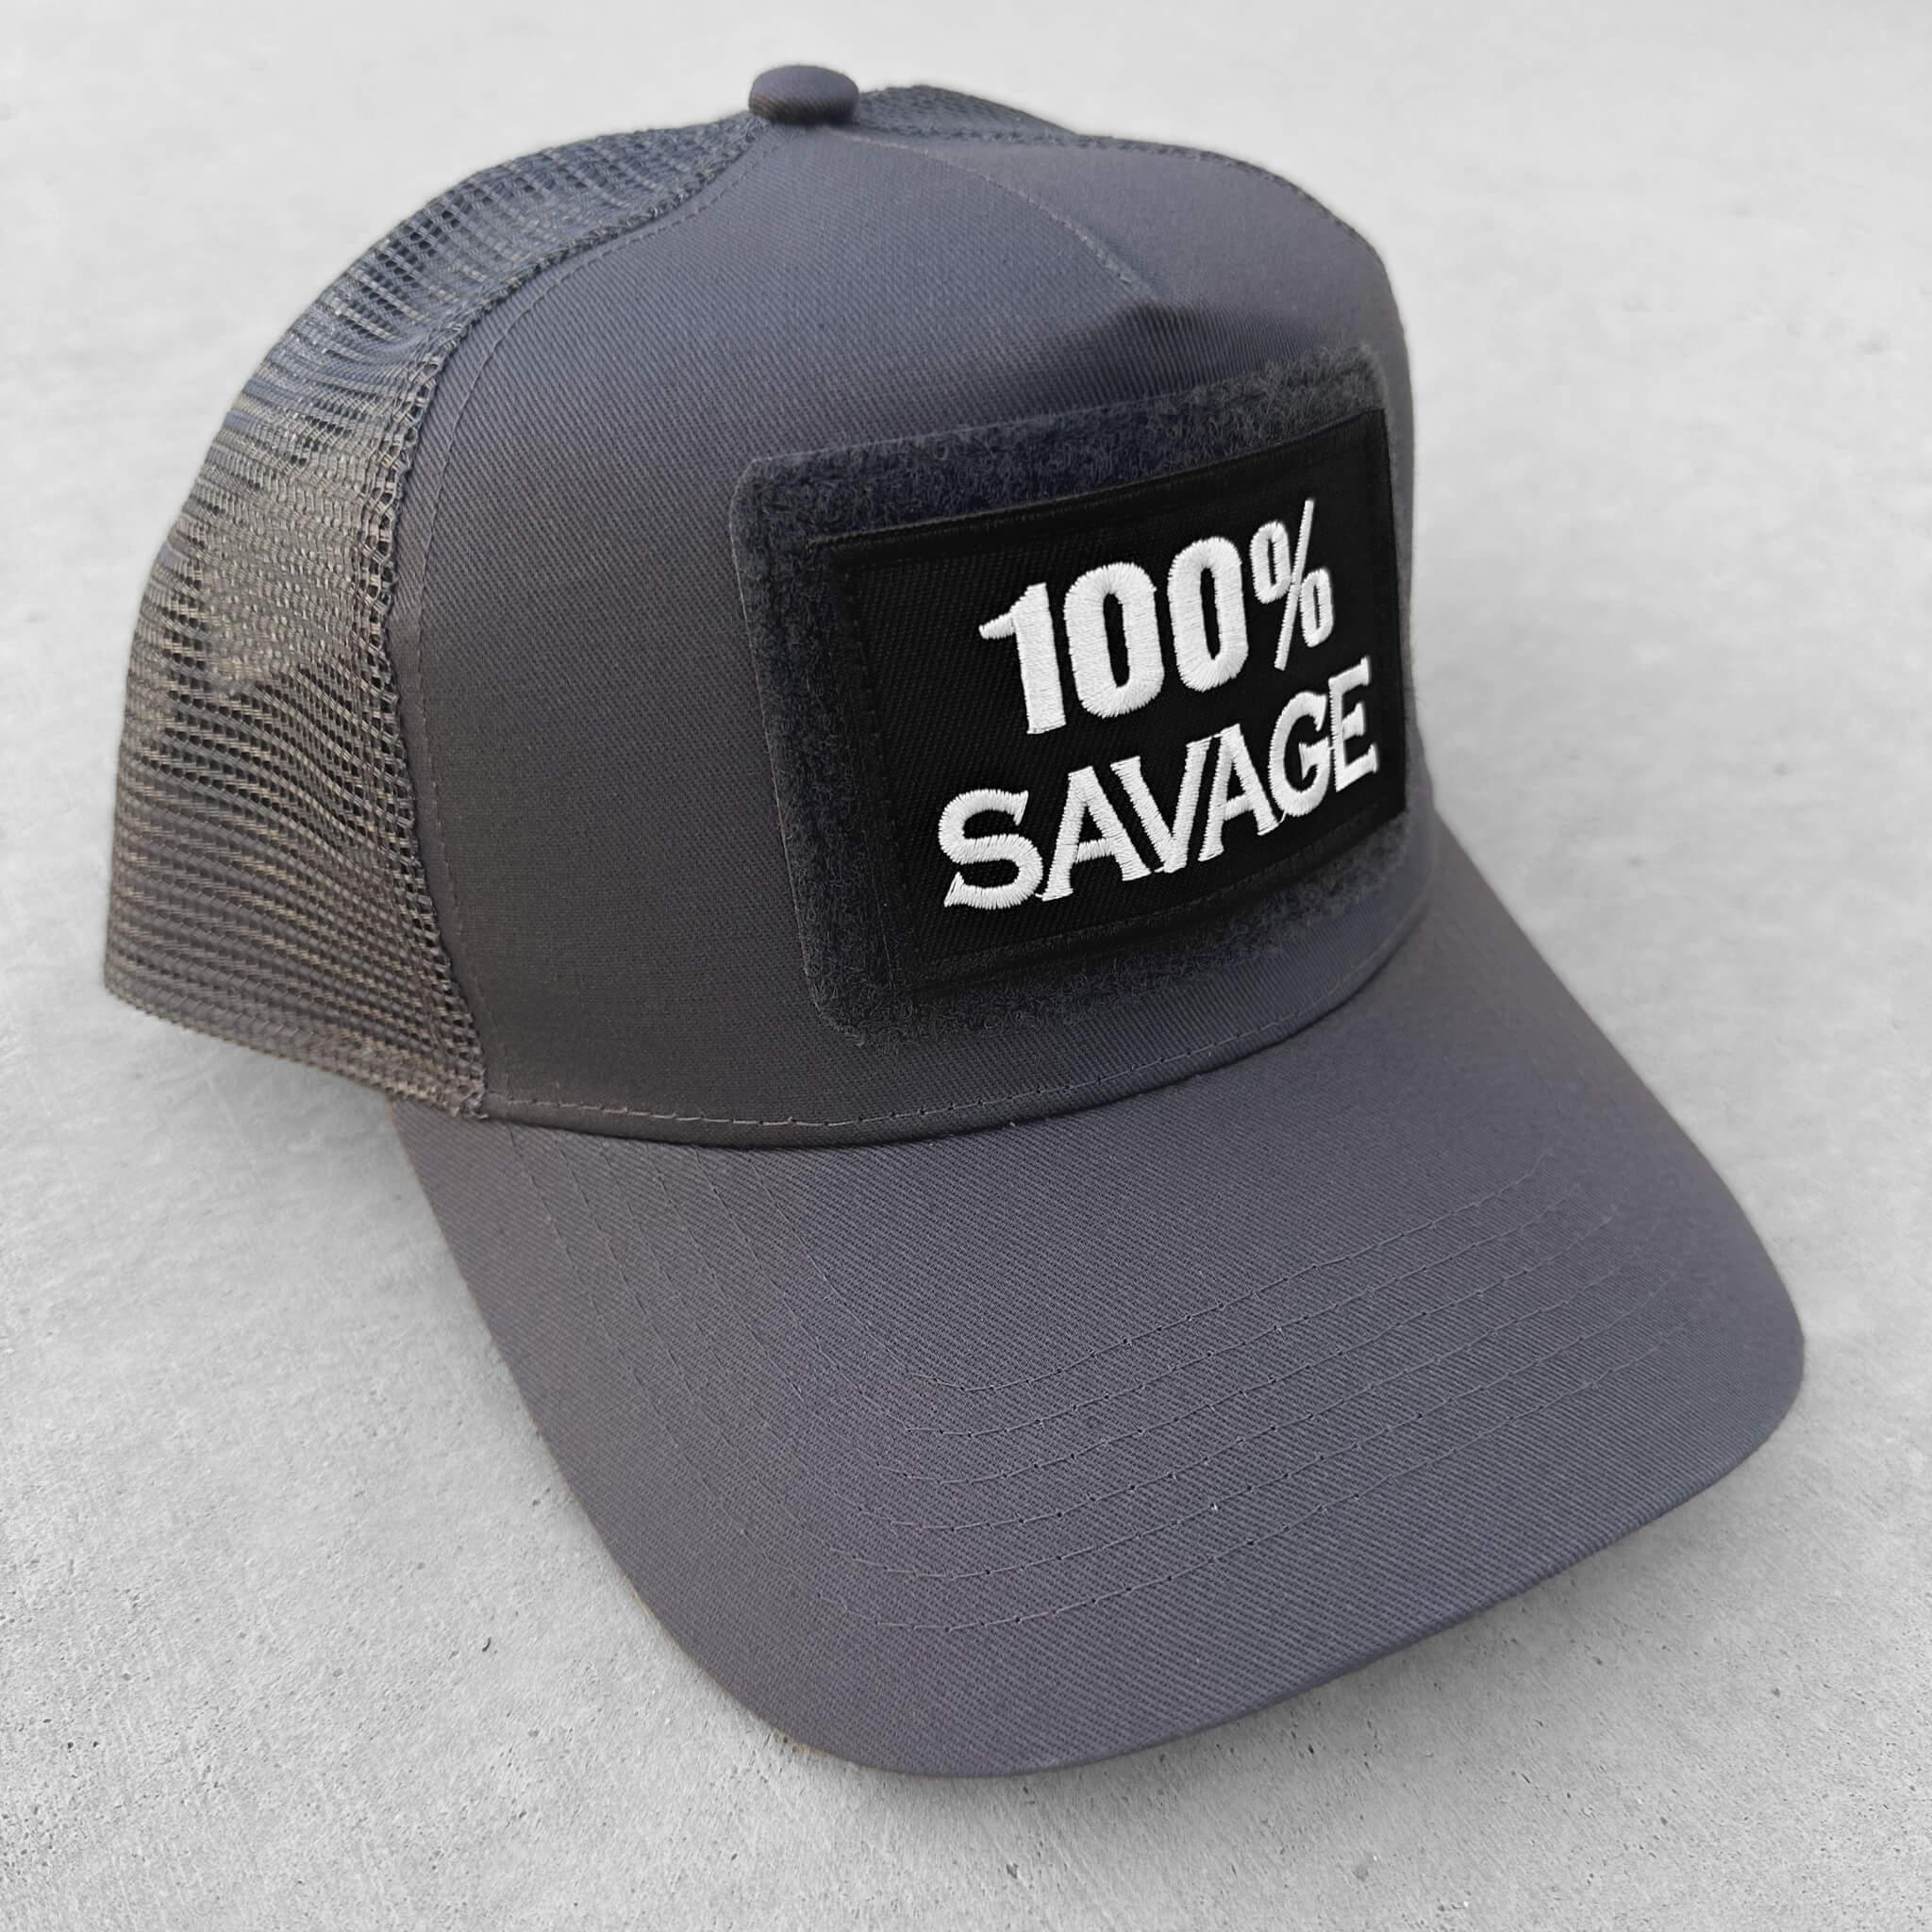 The trucker snapback cap in grey colors with 100% Savage patch attached